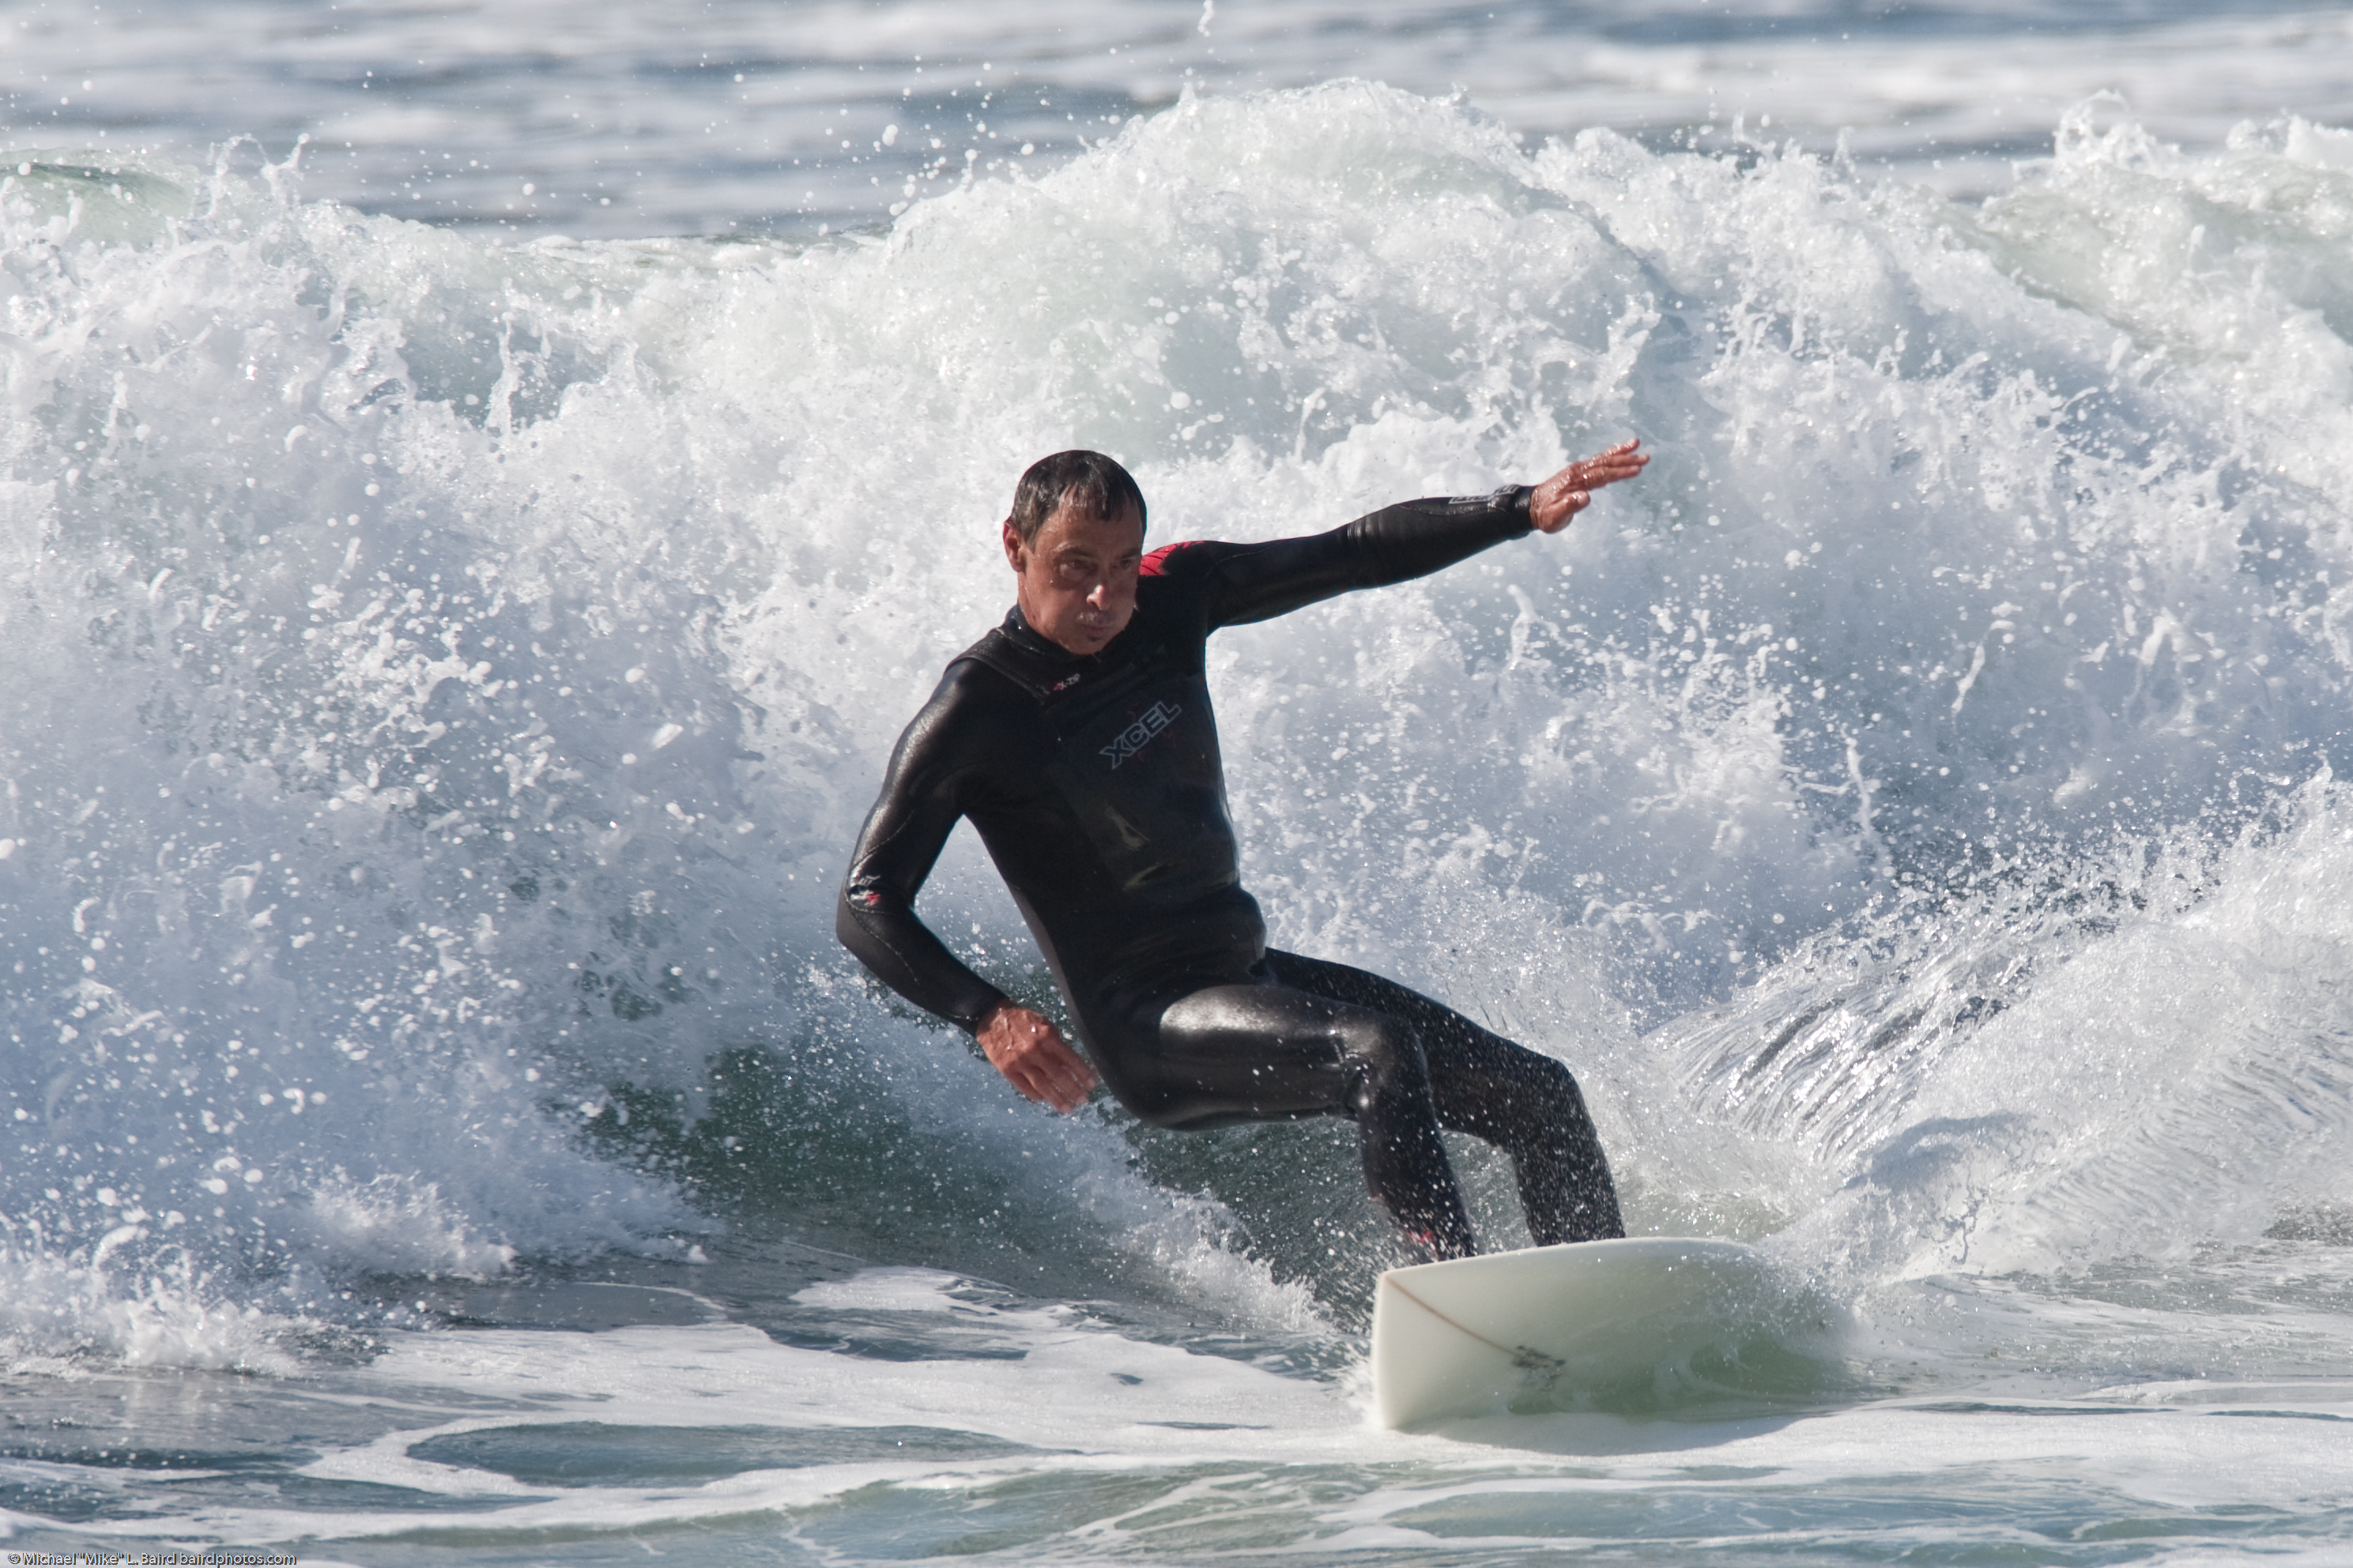 File:Mikebaird - Male Surfer Cuts a Good Form.jpg